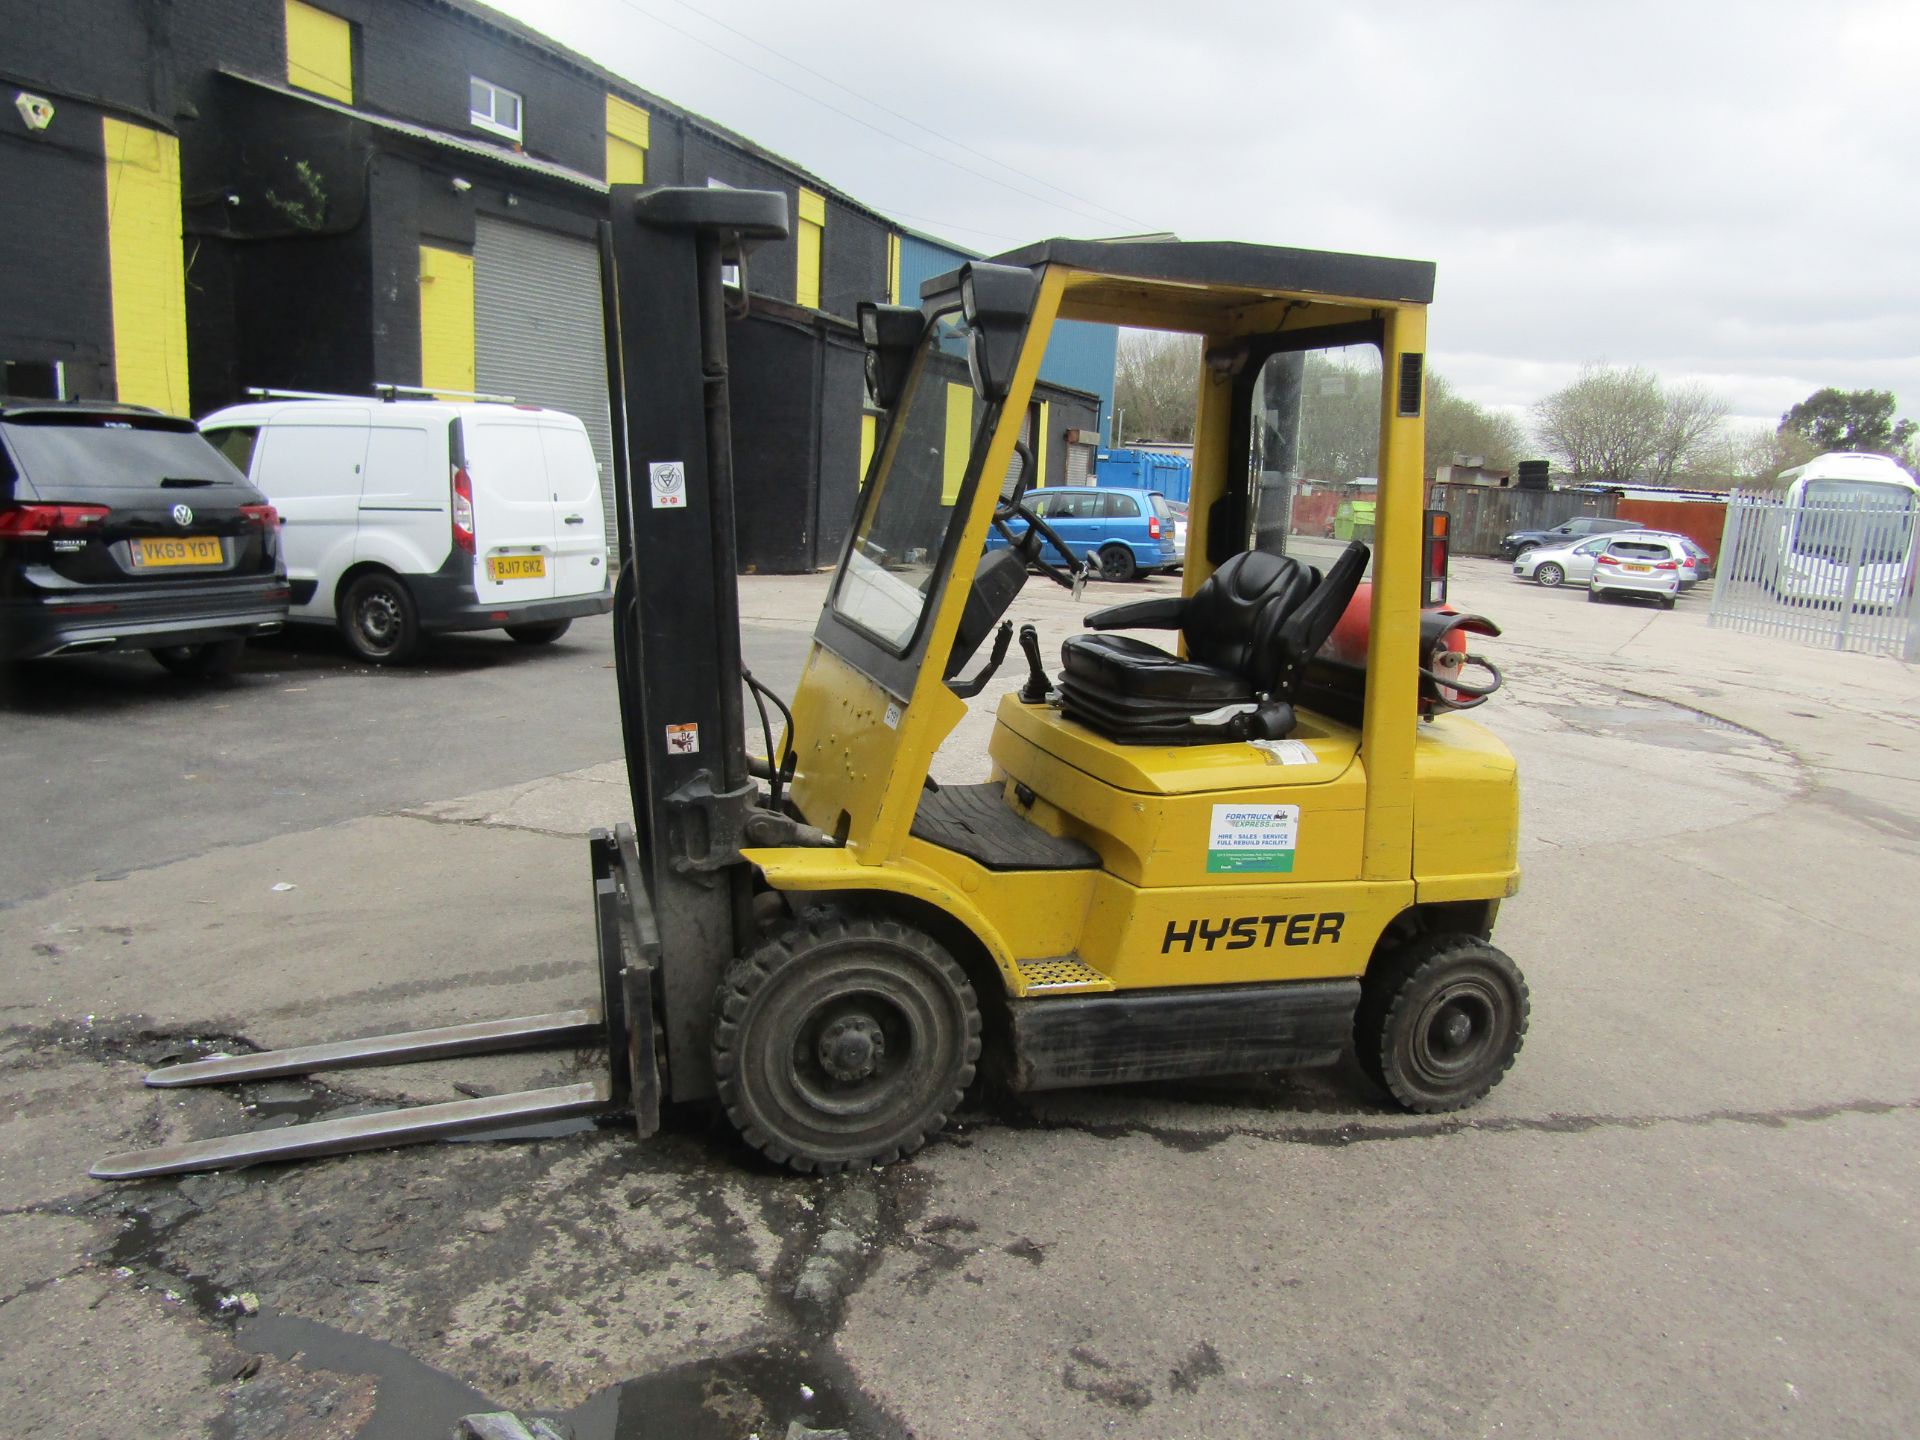 Hyster H2.00Xm Forklift Truck 7235 hours currently manufactured in 2004, has a roof as well as front - Bild 4 aus 12